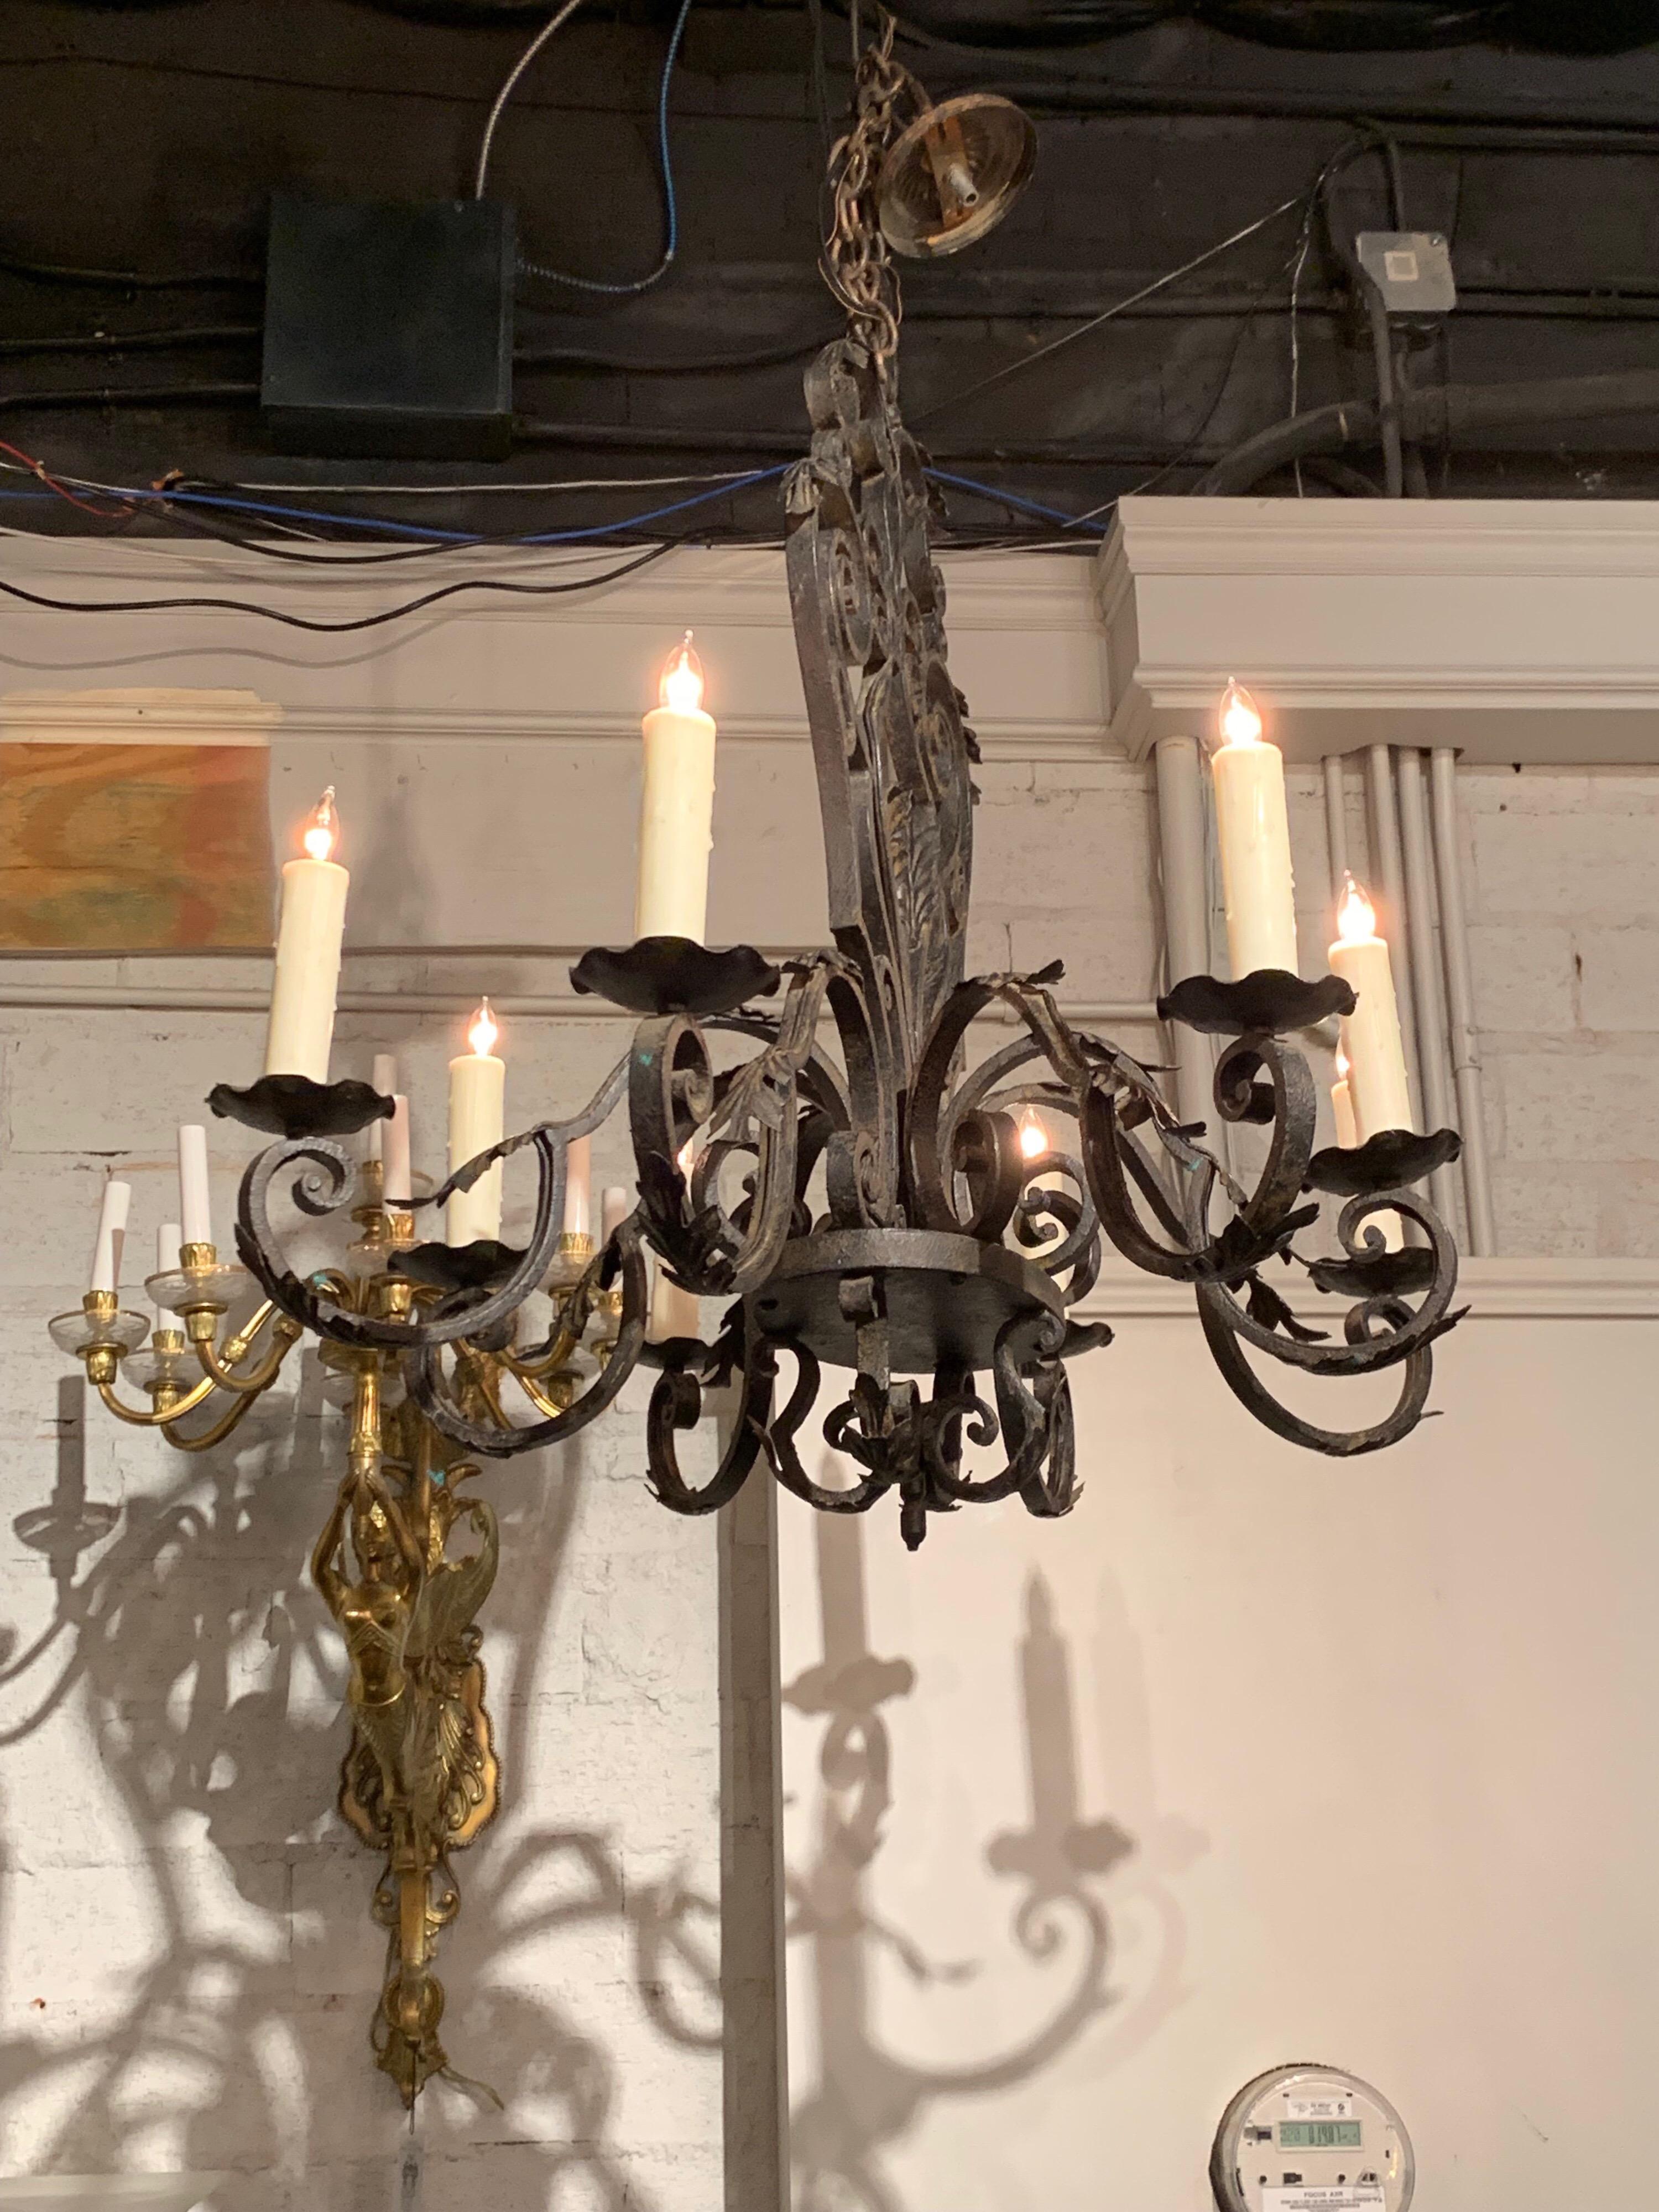 Beautiful French 8-light wrought iron chandelier. Nice heavy scroll work design on the wrought iron. Comes with a decorative chain and canopy, ready to hang.